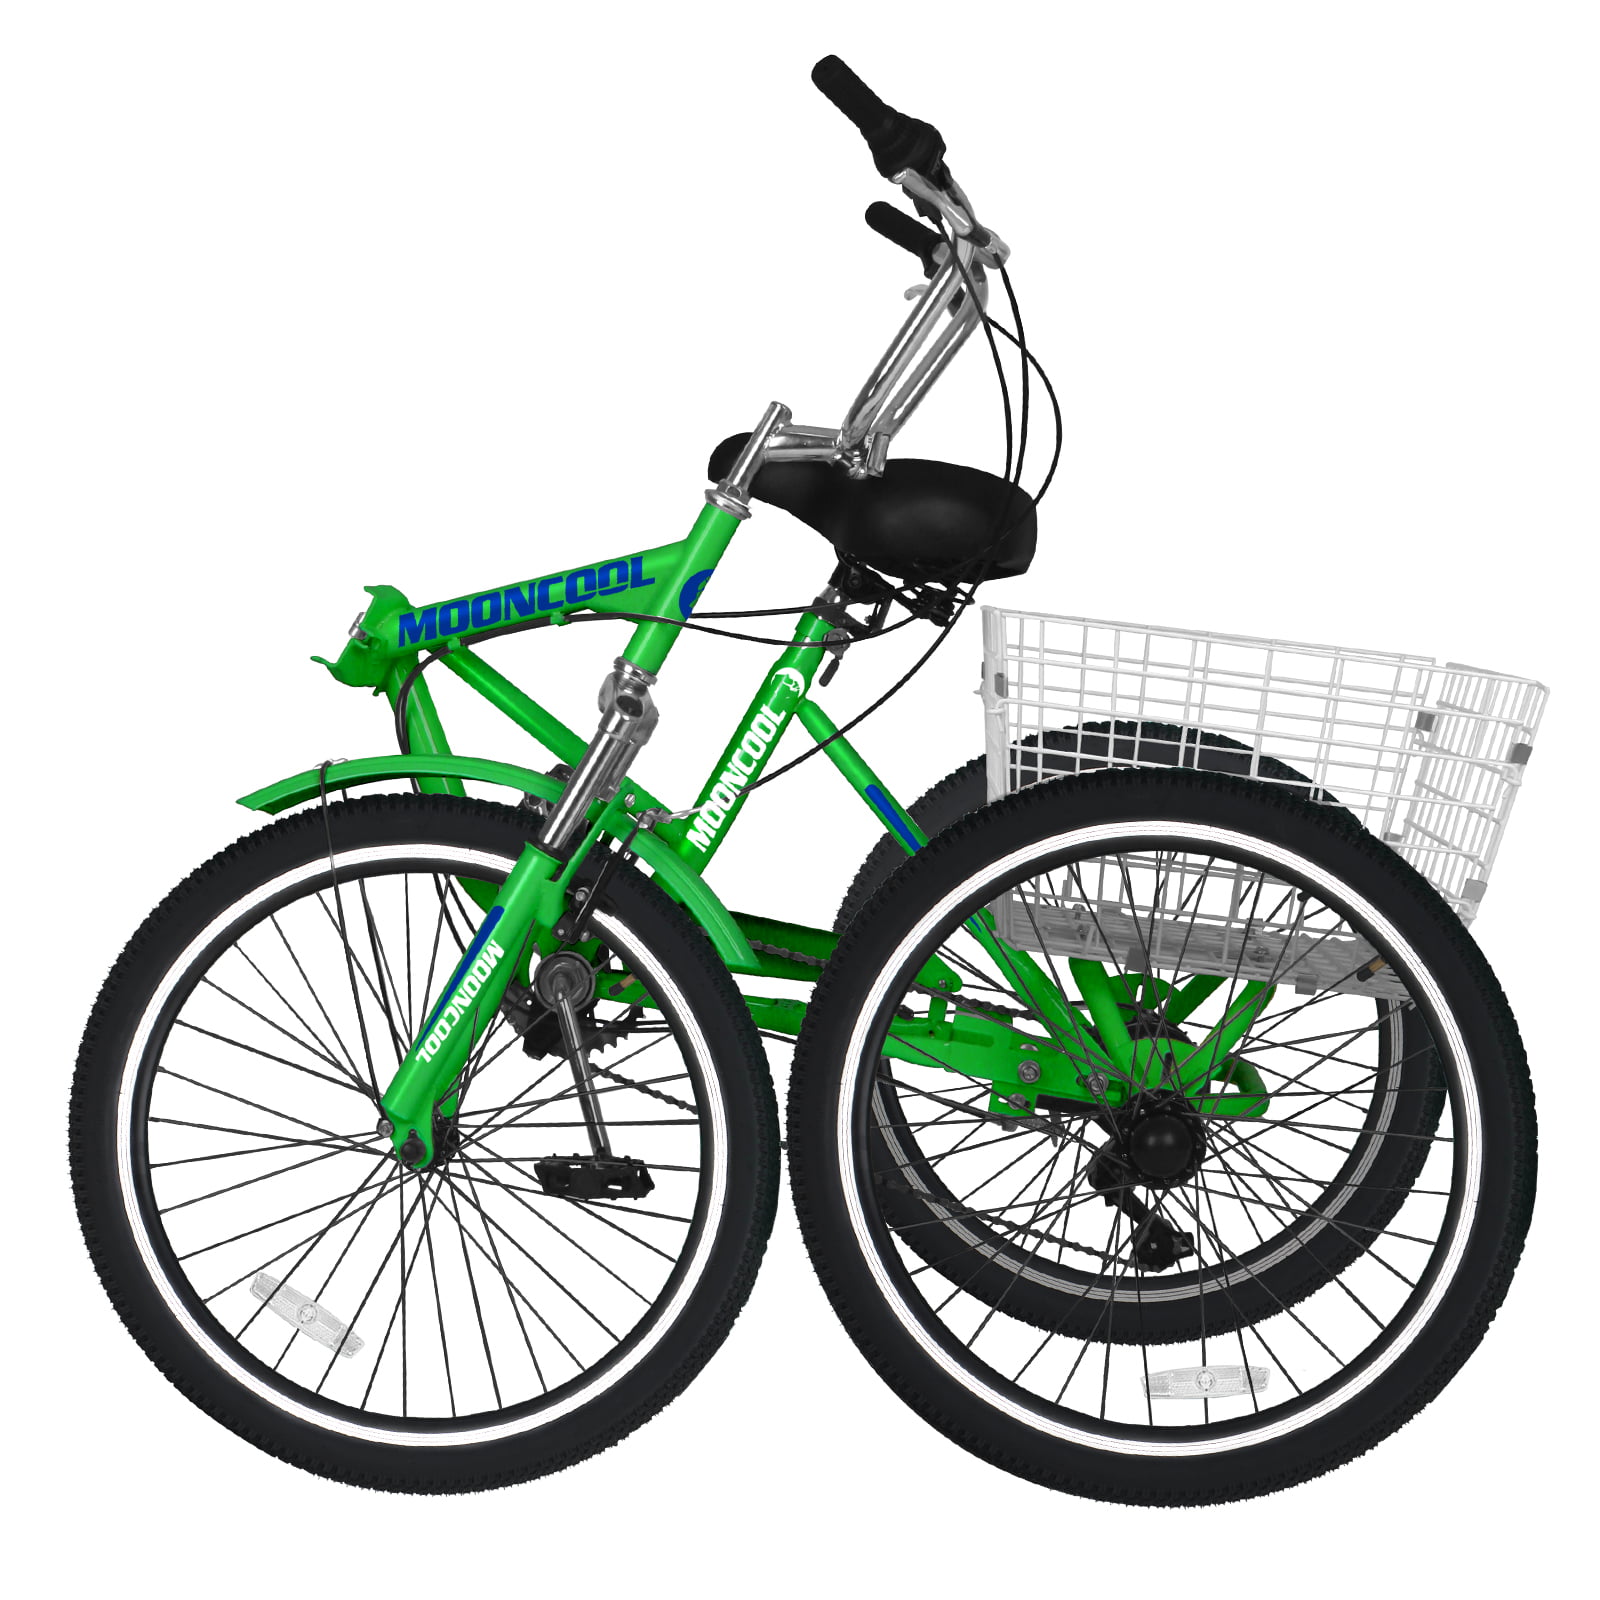 ABORON 20/24/26 inch 7 Speed Adult Tricycles with Big Basket,3-Wheels Cruiser Bike, Adult Trikes For Women ,Men , Seniors